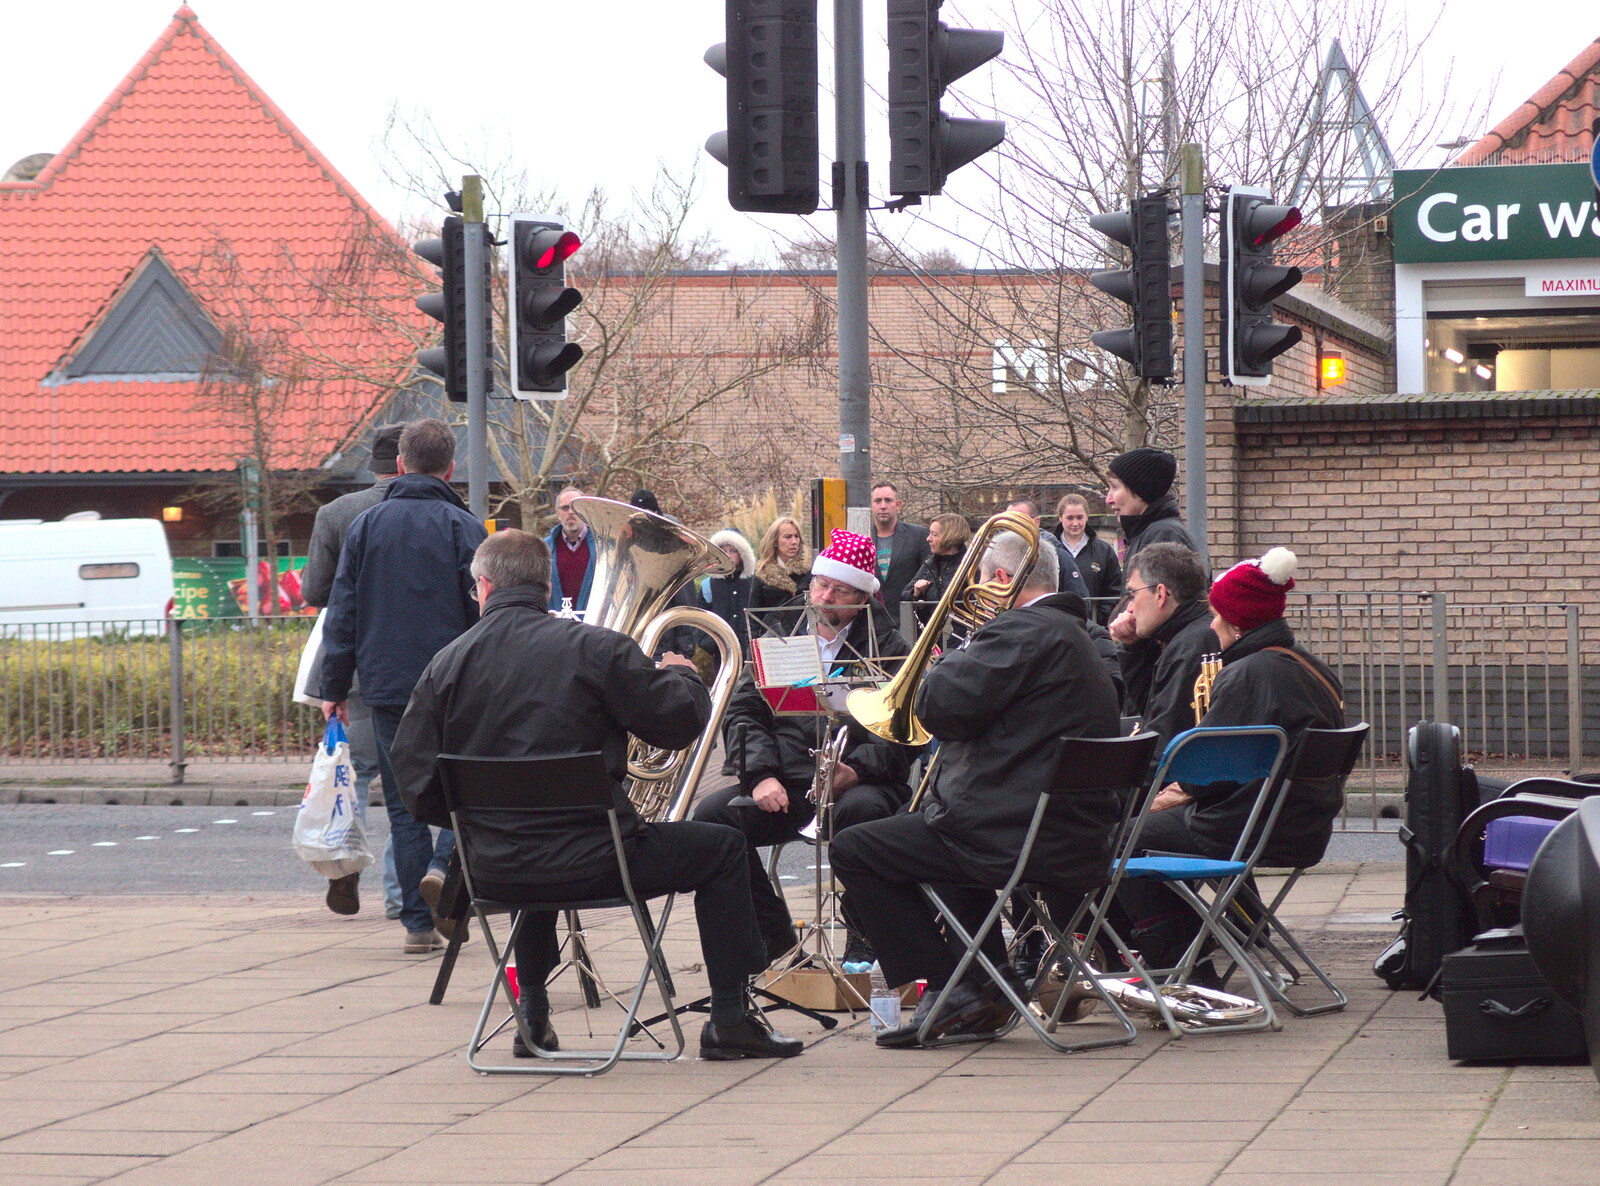 There's a brass band at the end of Mere Street from A Spot of Christmas Shopping, Norwich and Diss, Norfolk - 23rd December 2017